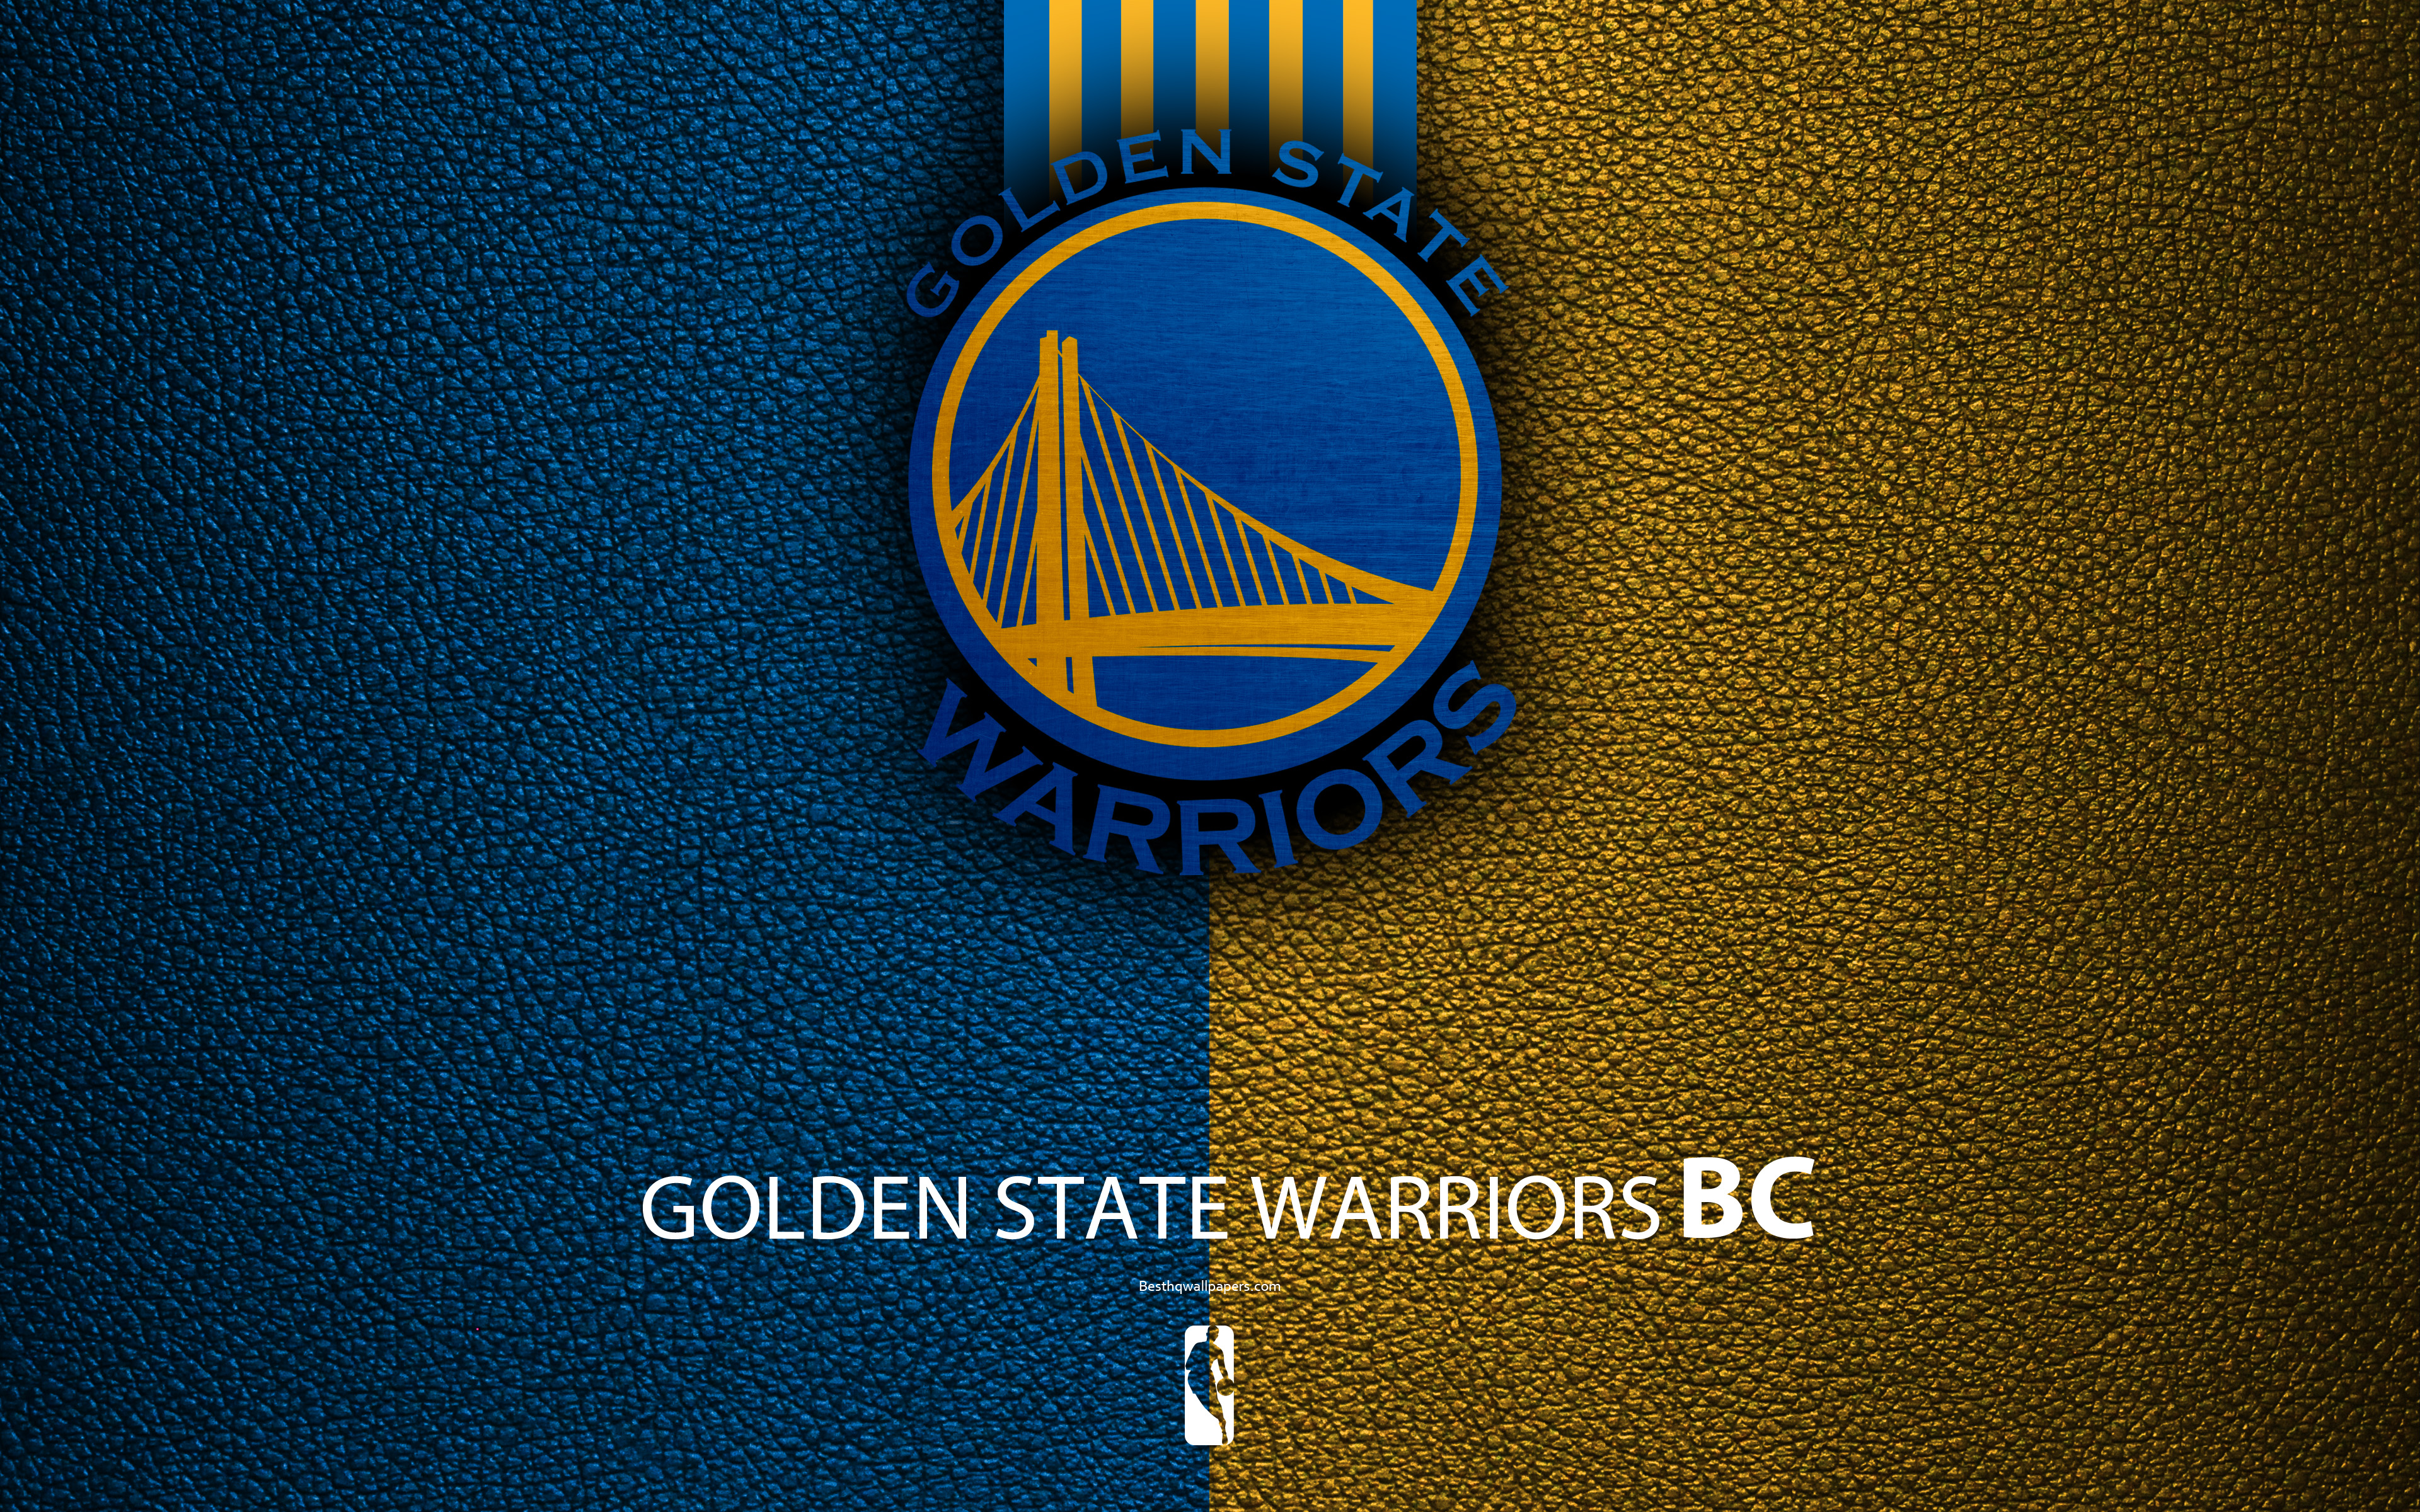 Download wallpaper Golden State Warriors, 4K, logo, basketball club, NBA, basketball, emblem, leather texture, National Basketball Association, Auckland, California, USA, Pacific Division, Western Conference for desktop with resolution 3840x2400. High